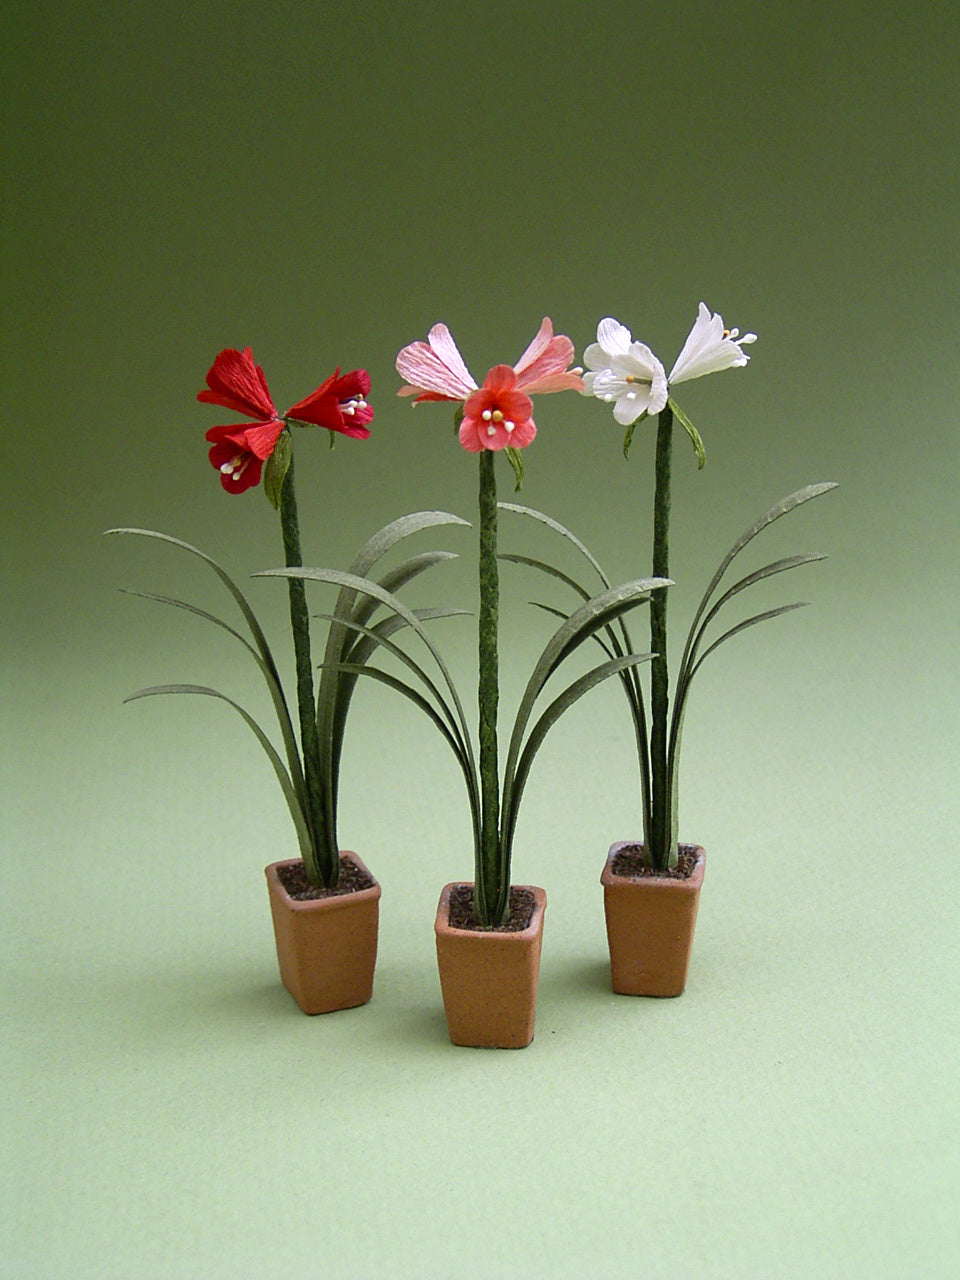 Amaryllis Paper Flower kit for 1/12th Dollhouses, Florists and Miniature Gardens